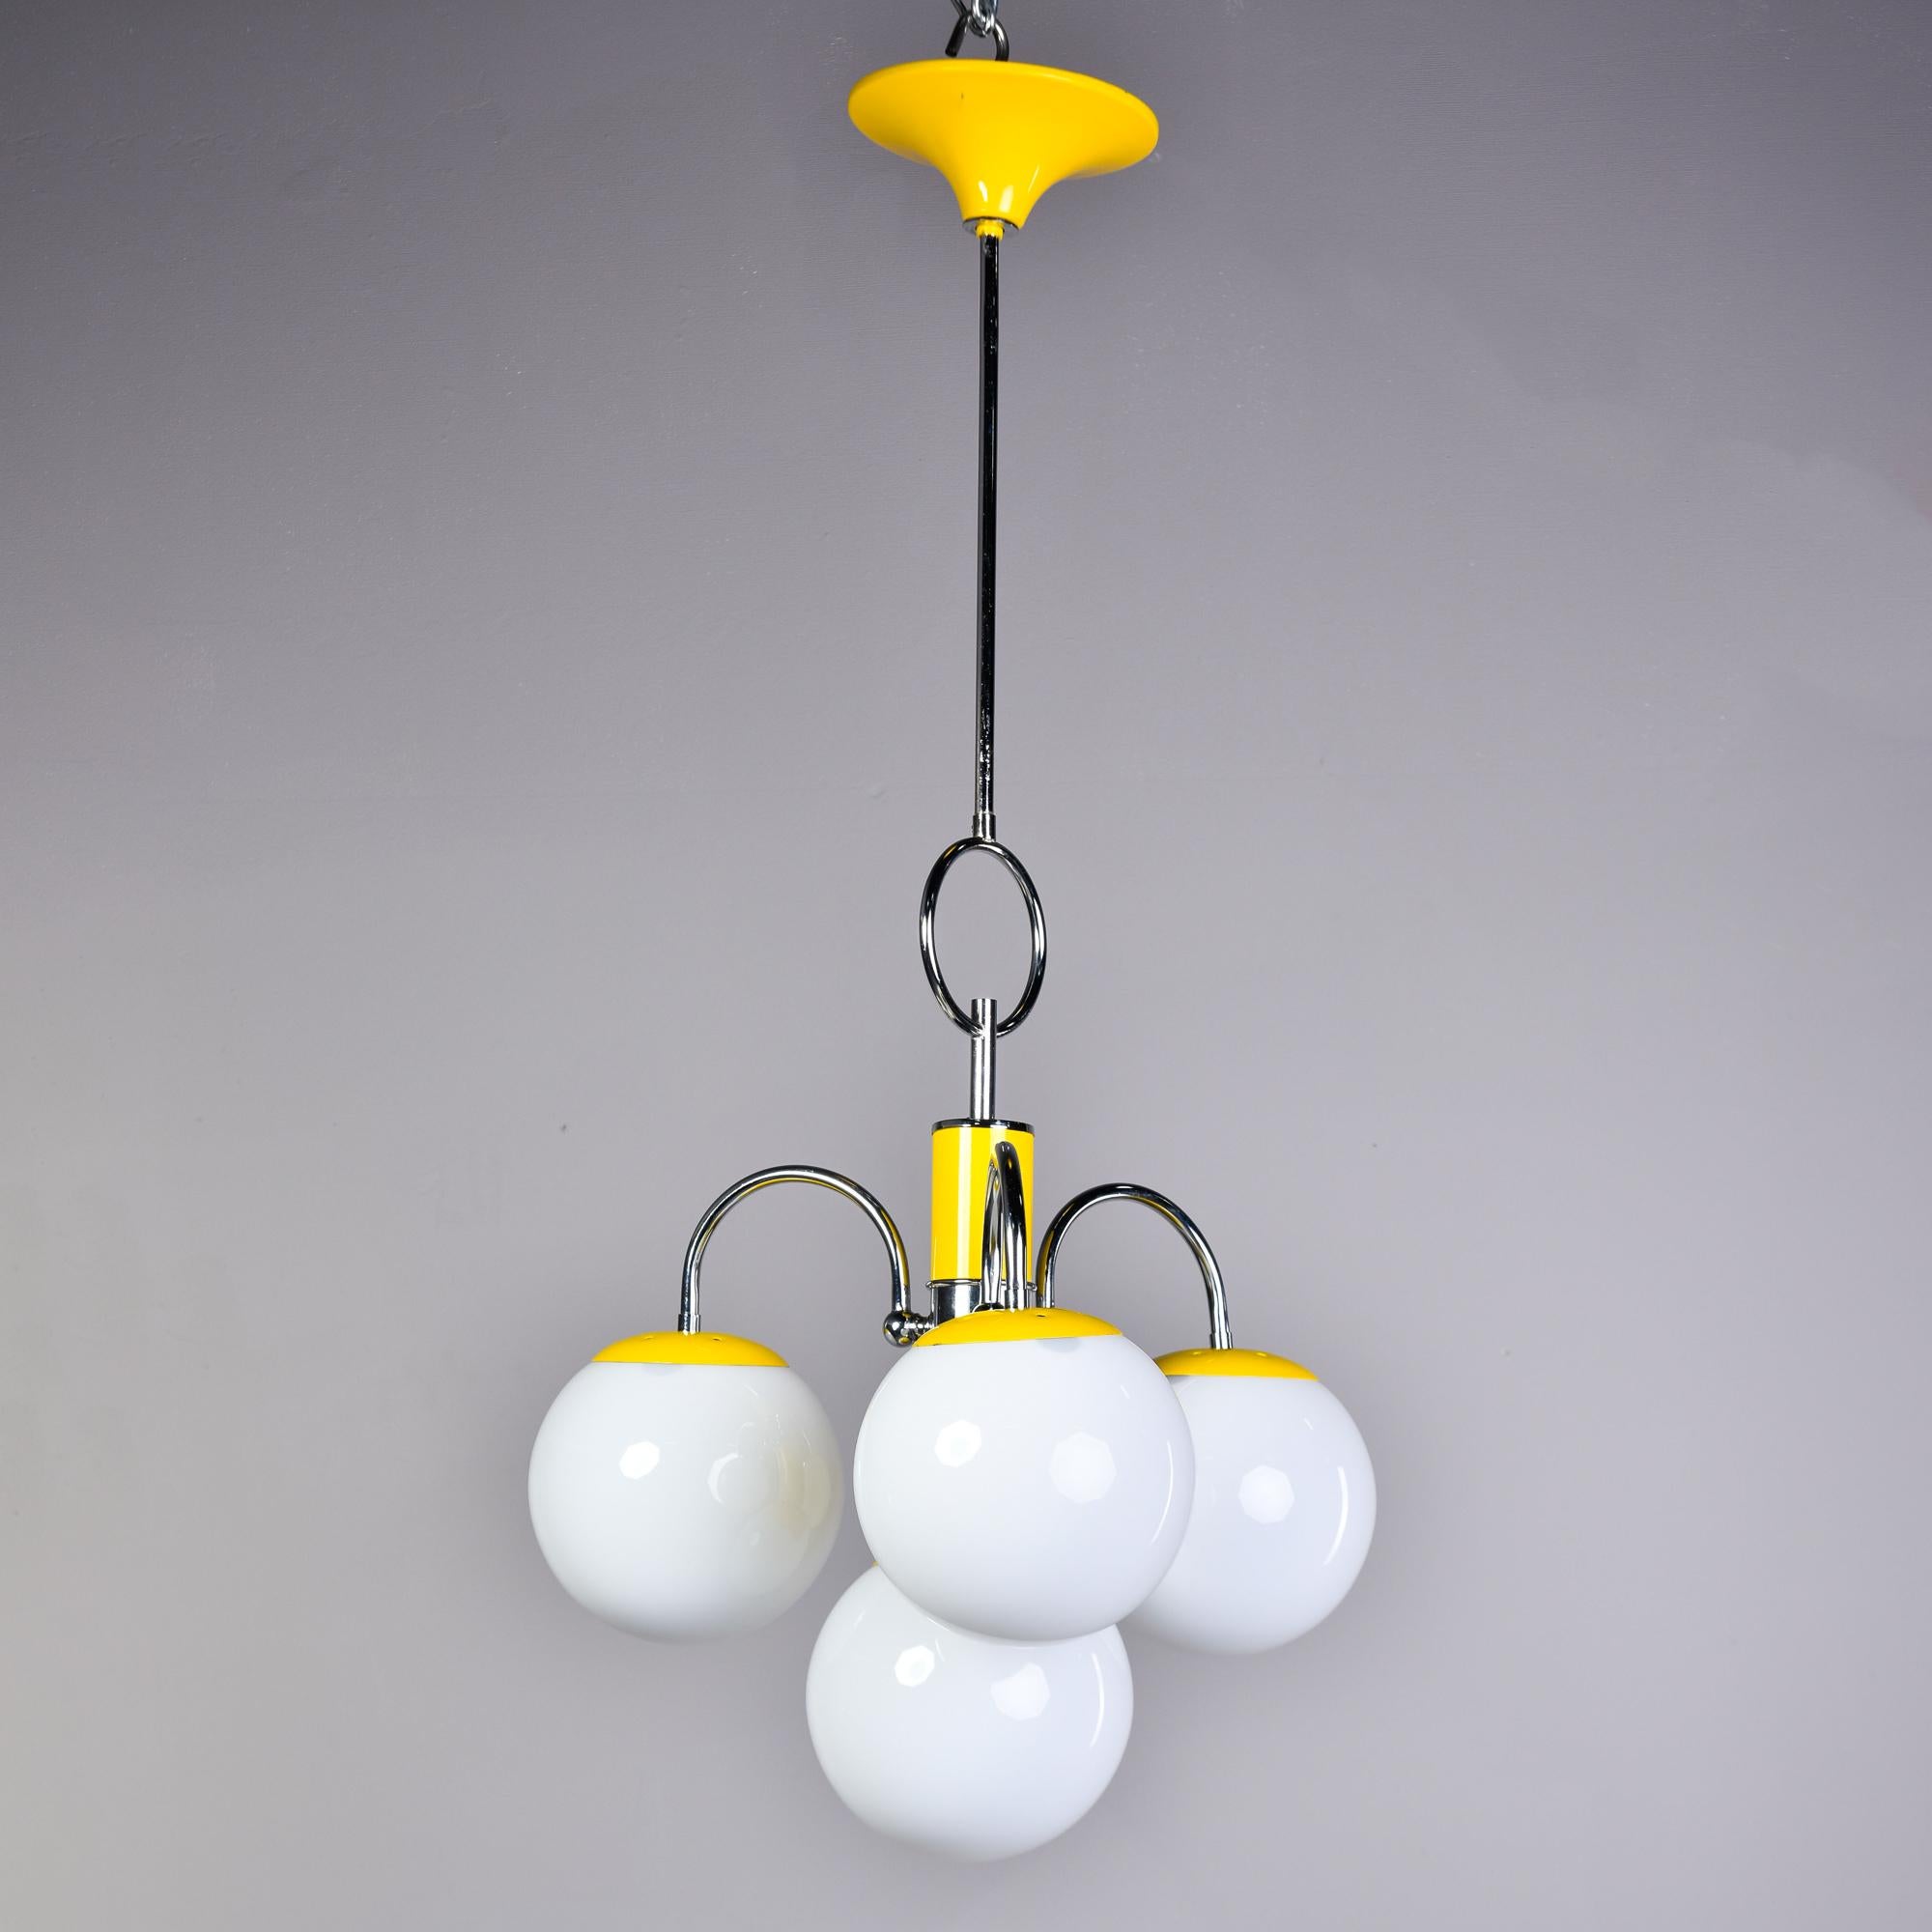 Found in Italy, this four light fixture dates from the early 1970s. Polished chrome frame with sunny yellow enamel accents and four white glass globes. Each globe has a single internal standard sized light socket. Wiring has been updated for US